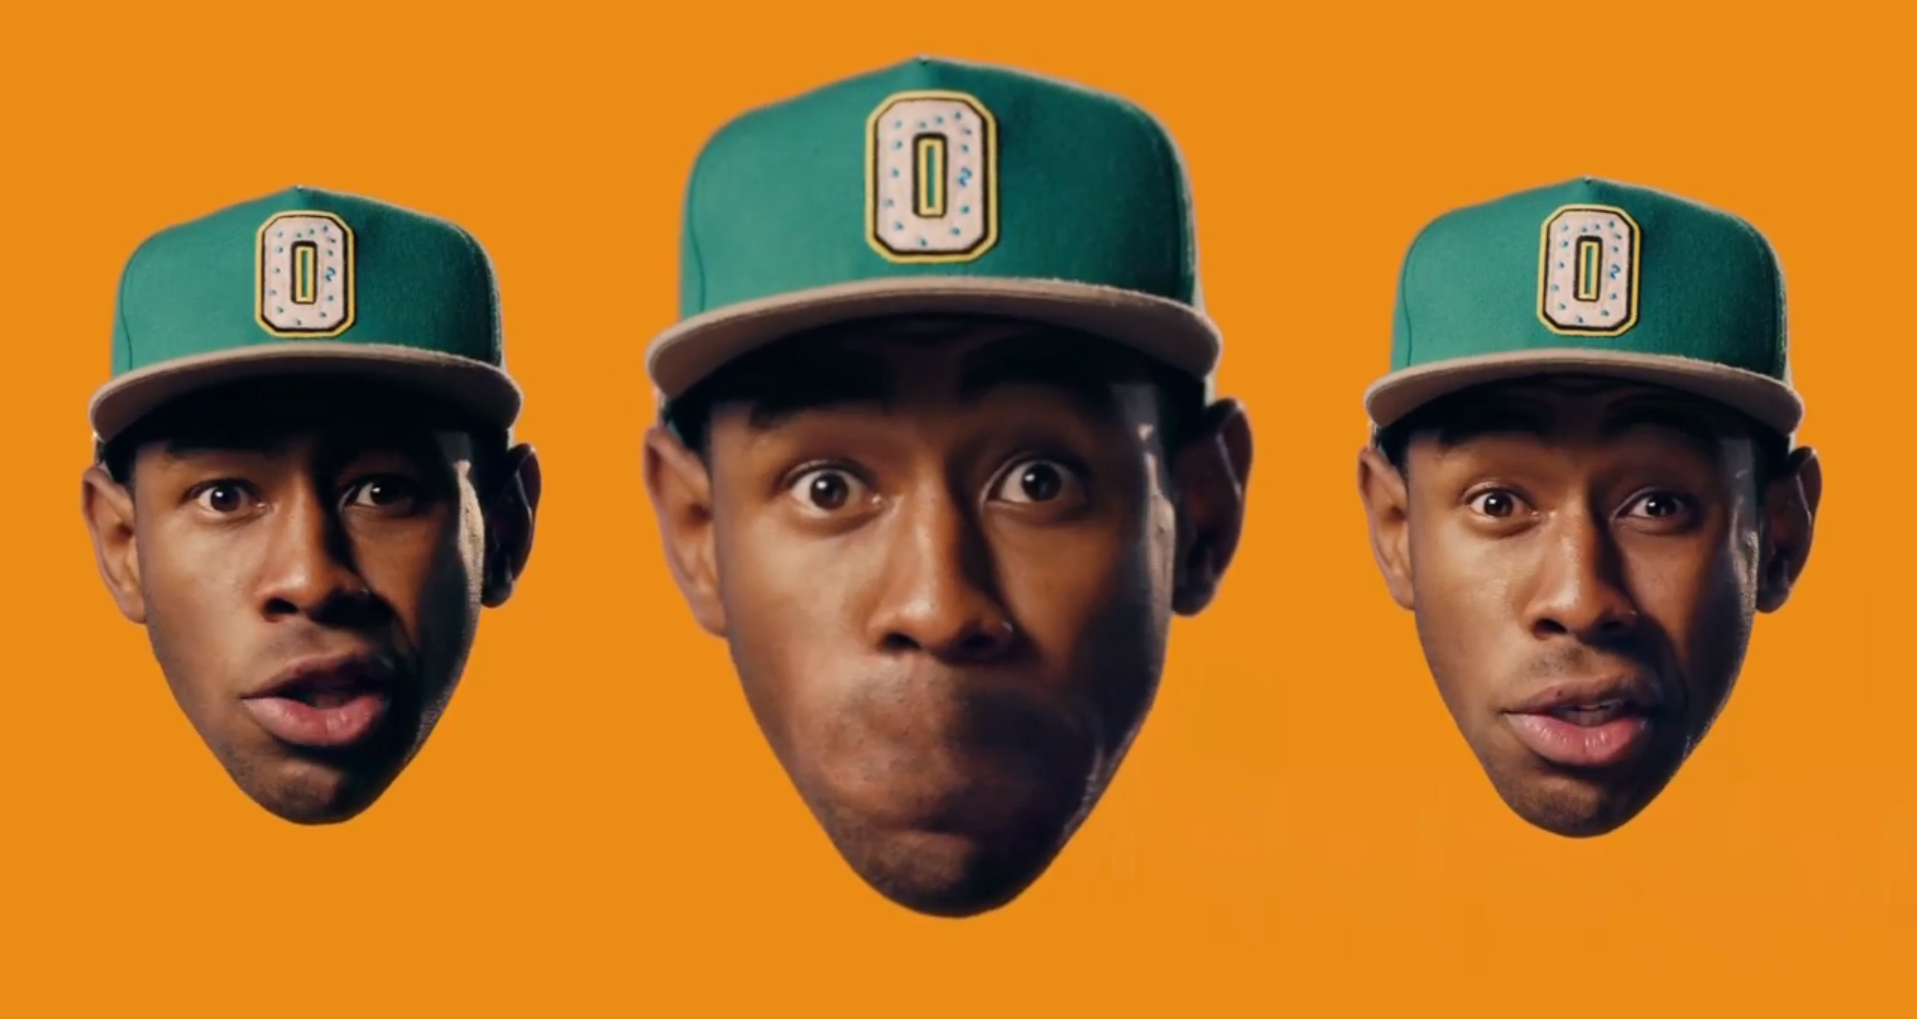 Download Tyler the Creator Orange 3 Head background for your phone